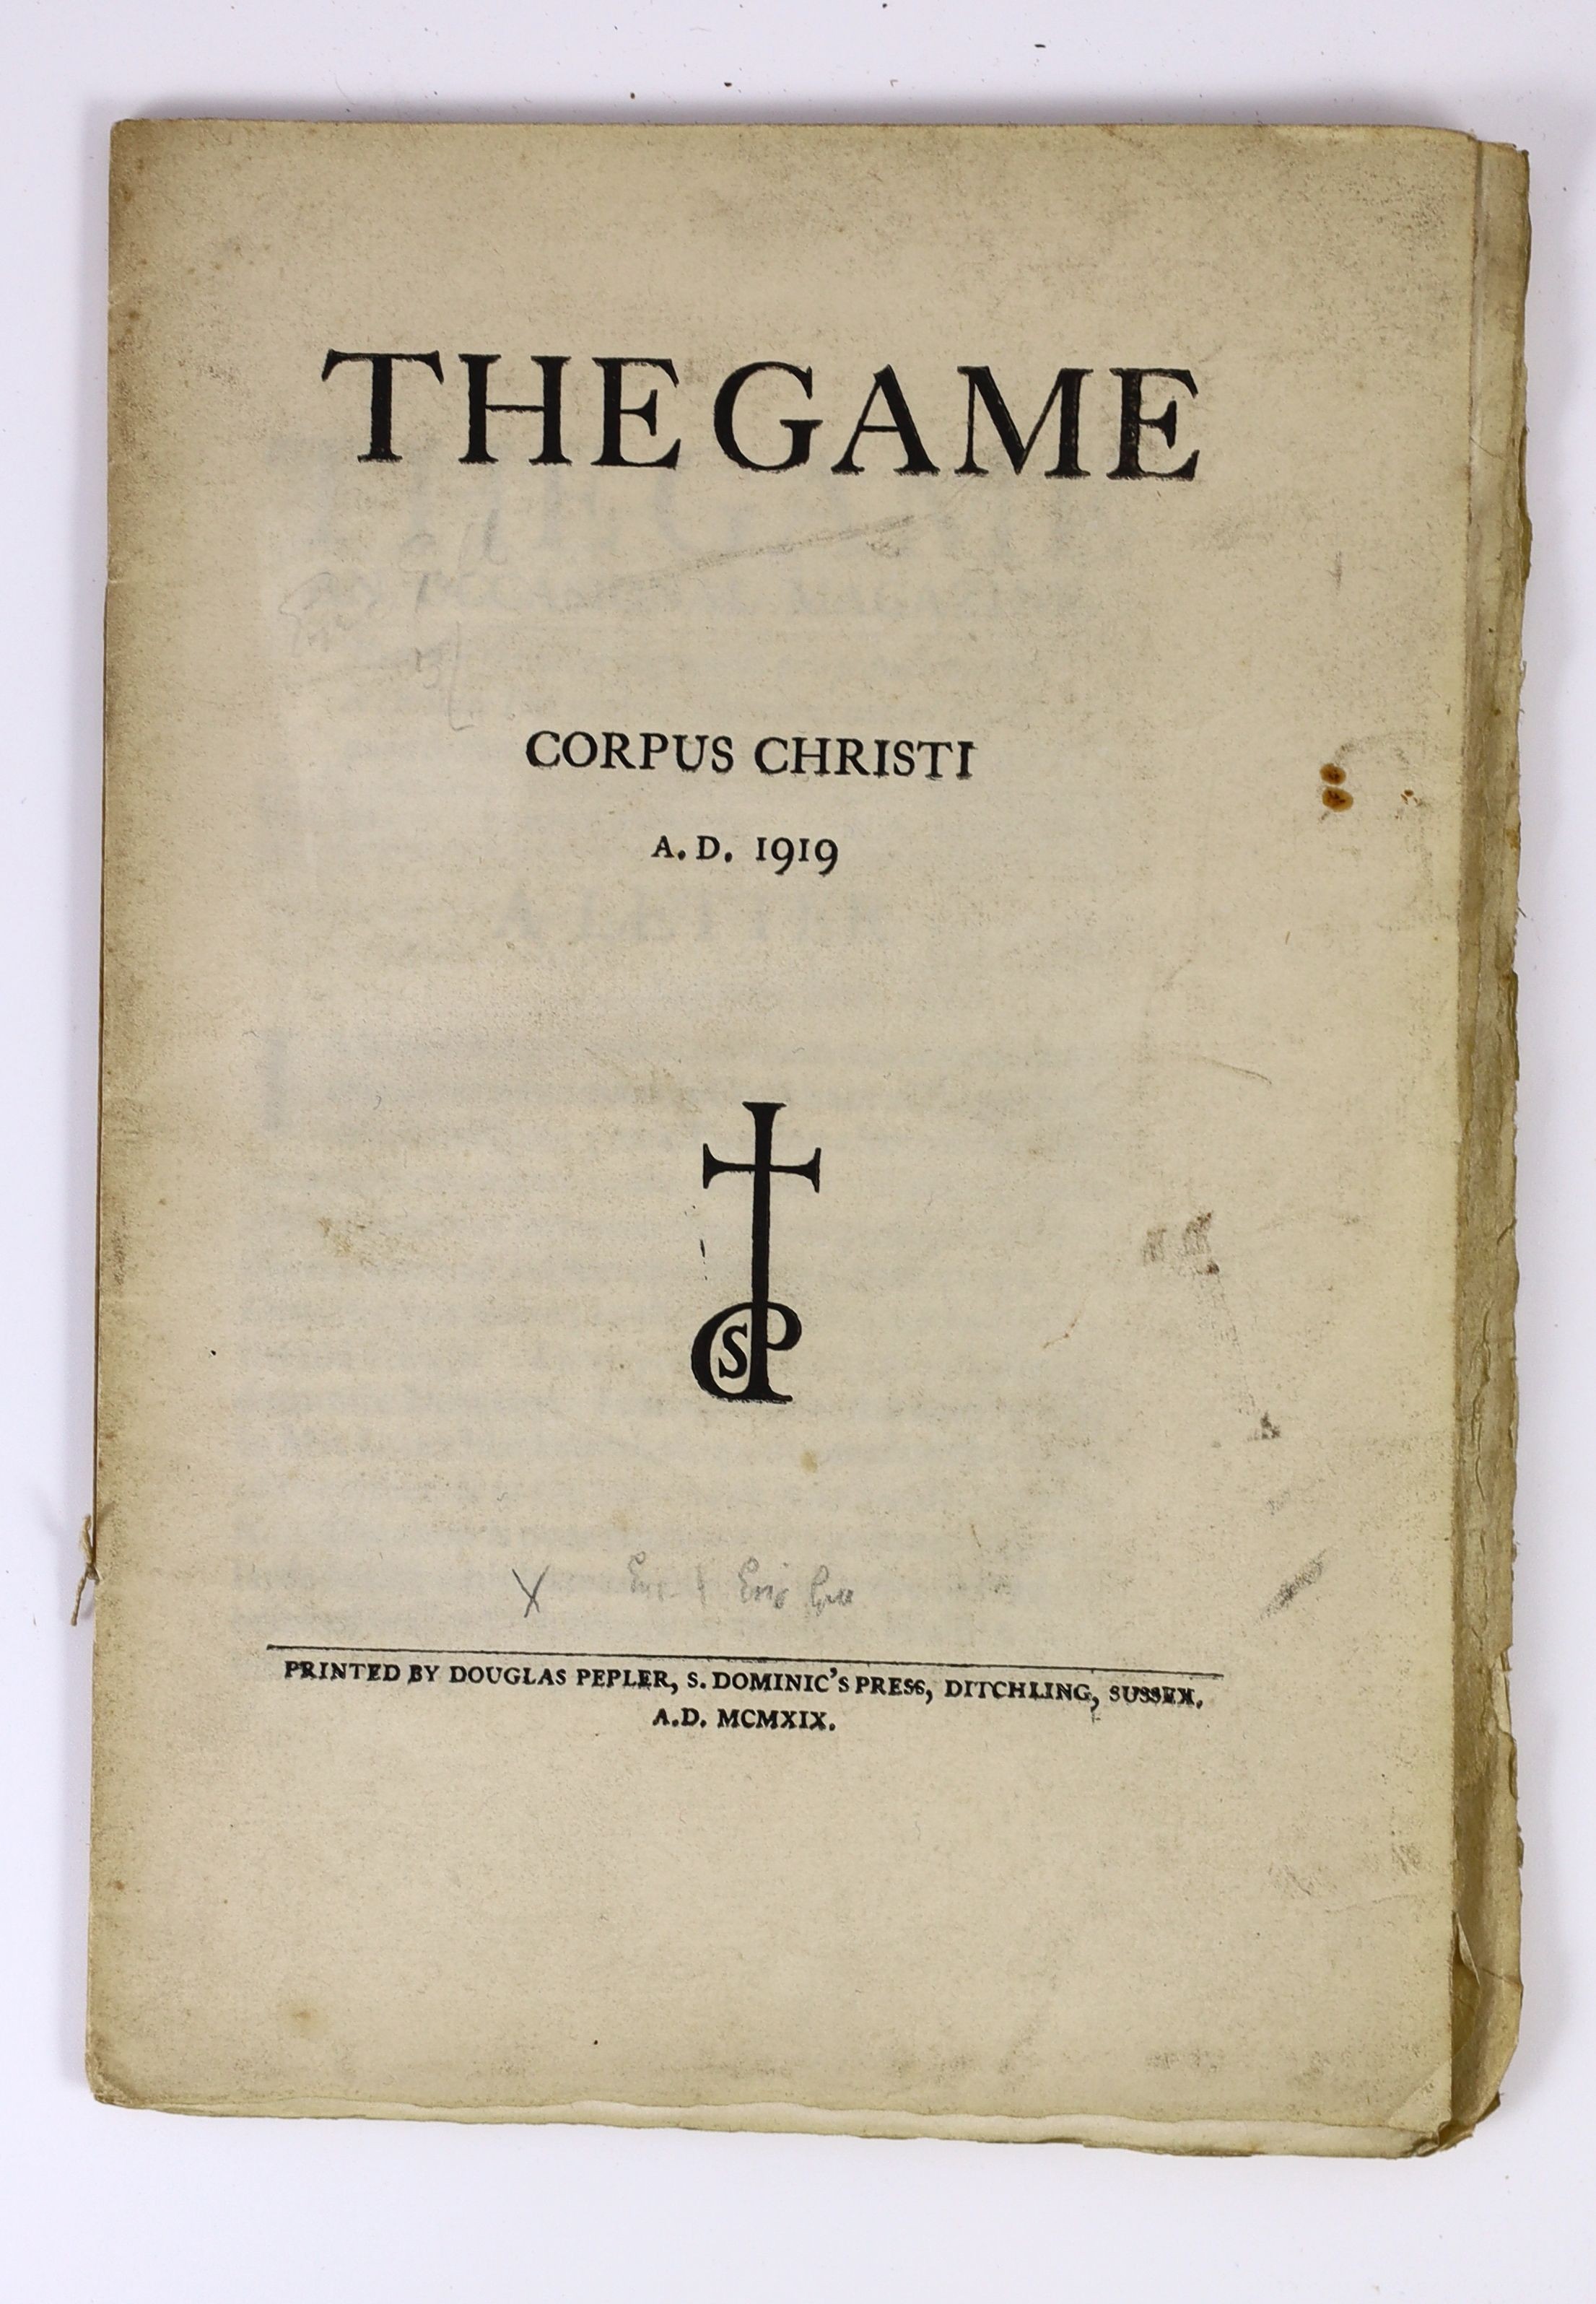 The Game: An Occasional Magazine, Vol. III, Corpus Christi A.D. 1919 No. 1, with an engraved plate by Eric Gill, published by Douglas Pepler, S. Dominic’s Press, Ditchling, 1919